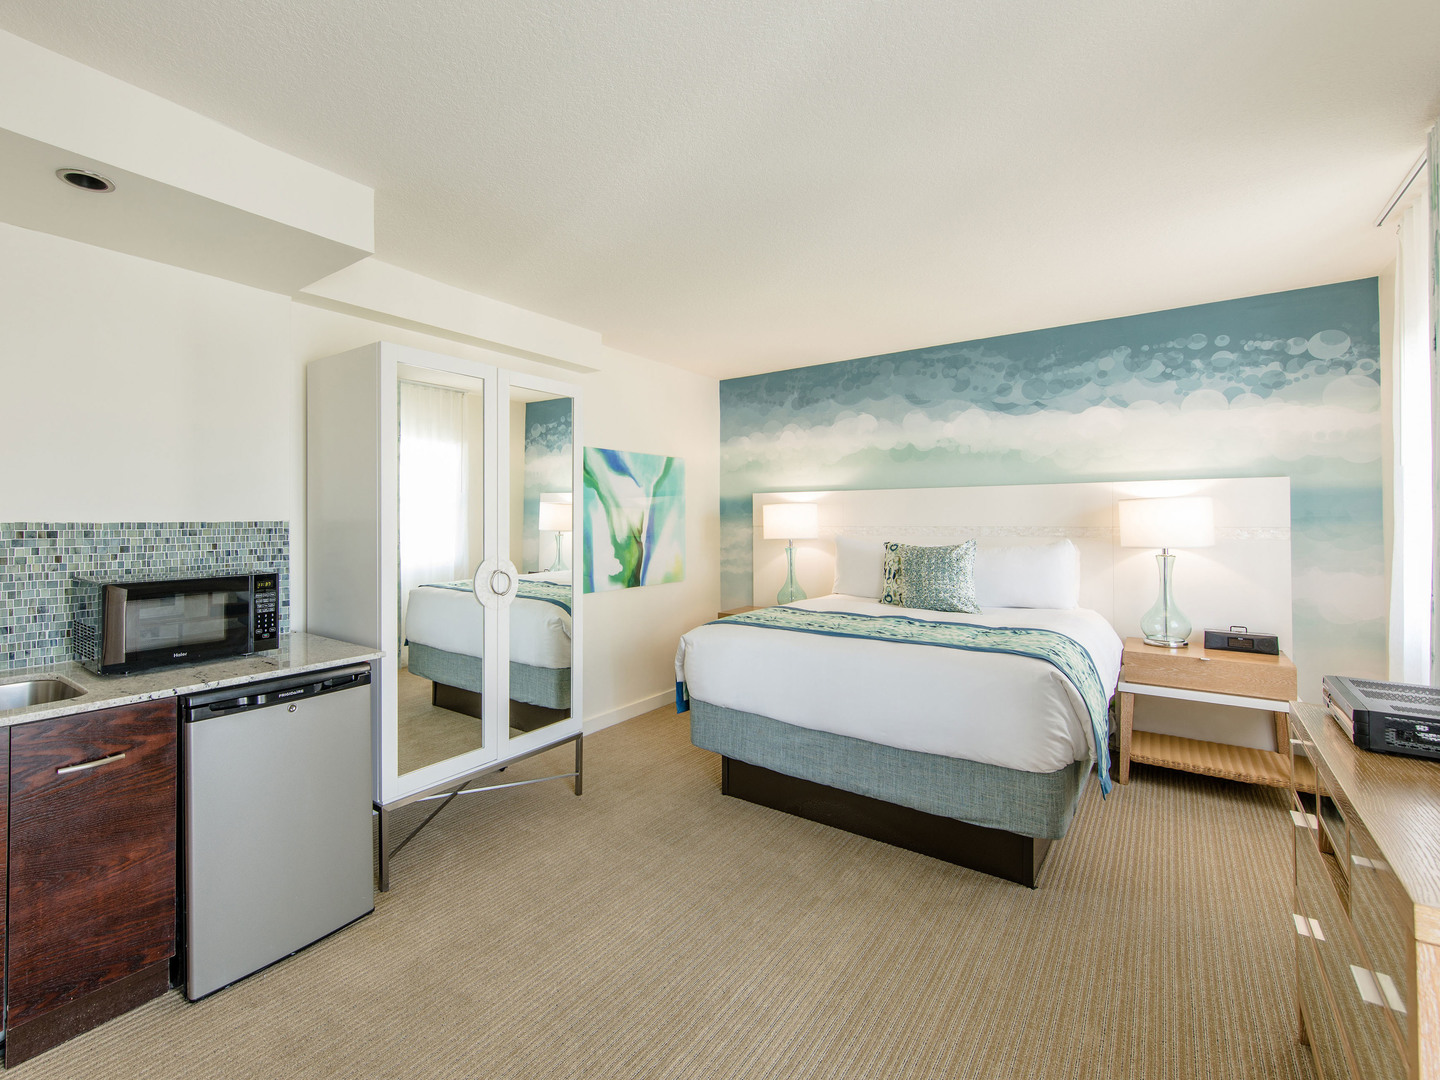 Marriott Vacation Club Pulse<span class='trademark'>®</span>, South Beach Studio. Marriott Vacation Club Pulse<span class='trademark'>®</span>, South Beach is located in Miami Beach, Florida United States.